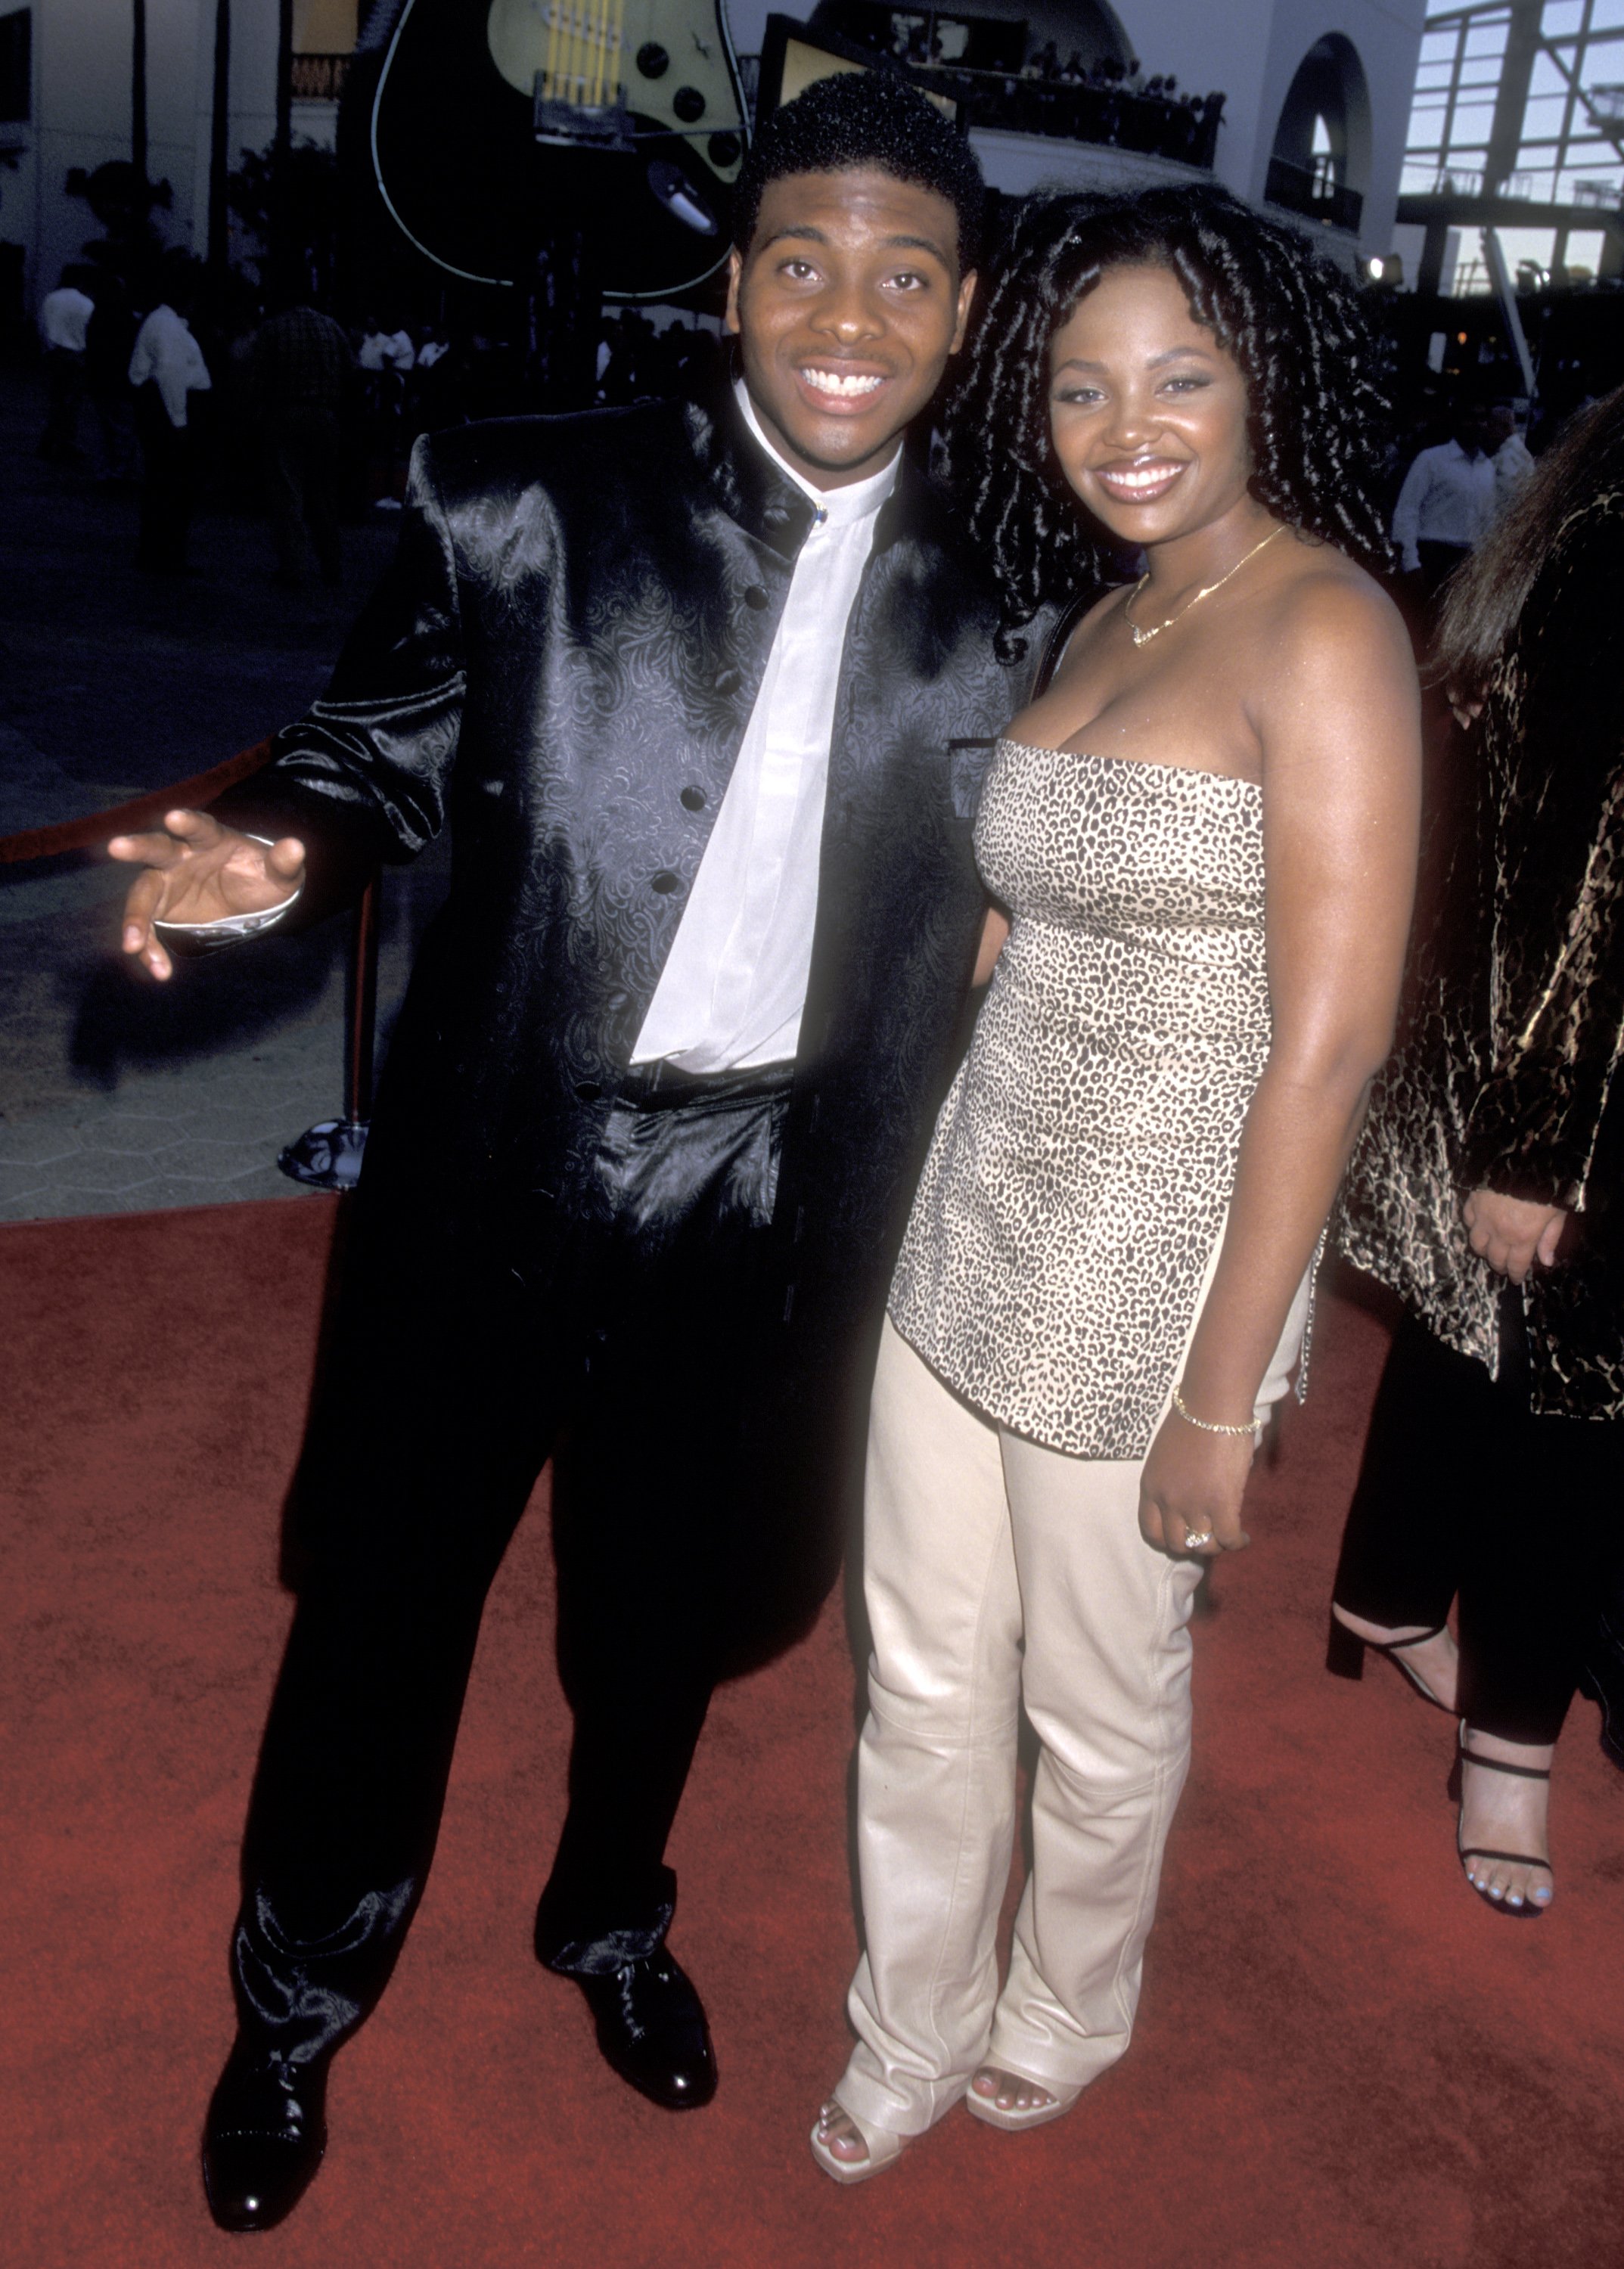 Kel Mitchell and Tyisha Hampton at the premiere of "Mystery Men" in California, on July 22, 1999 | Source: Getty Images